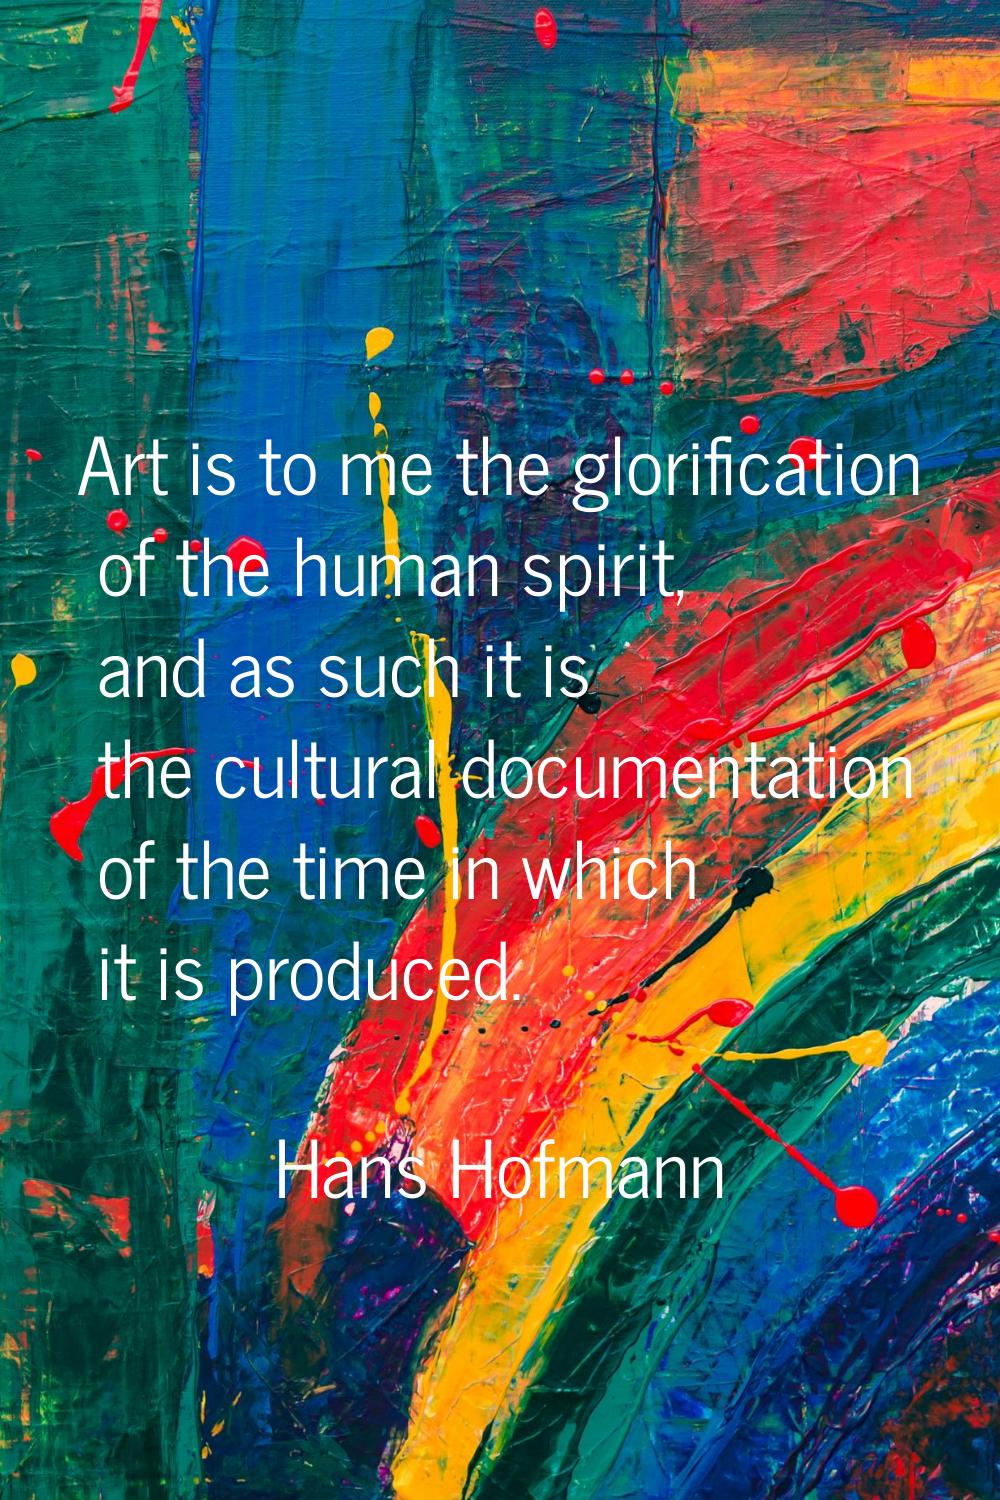 Art is to me the glorification of the human spirit, and as such it is the cultural documentation of